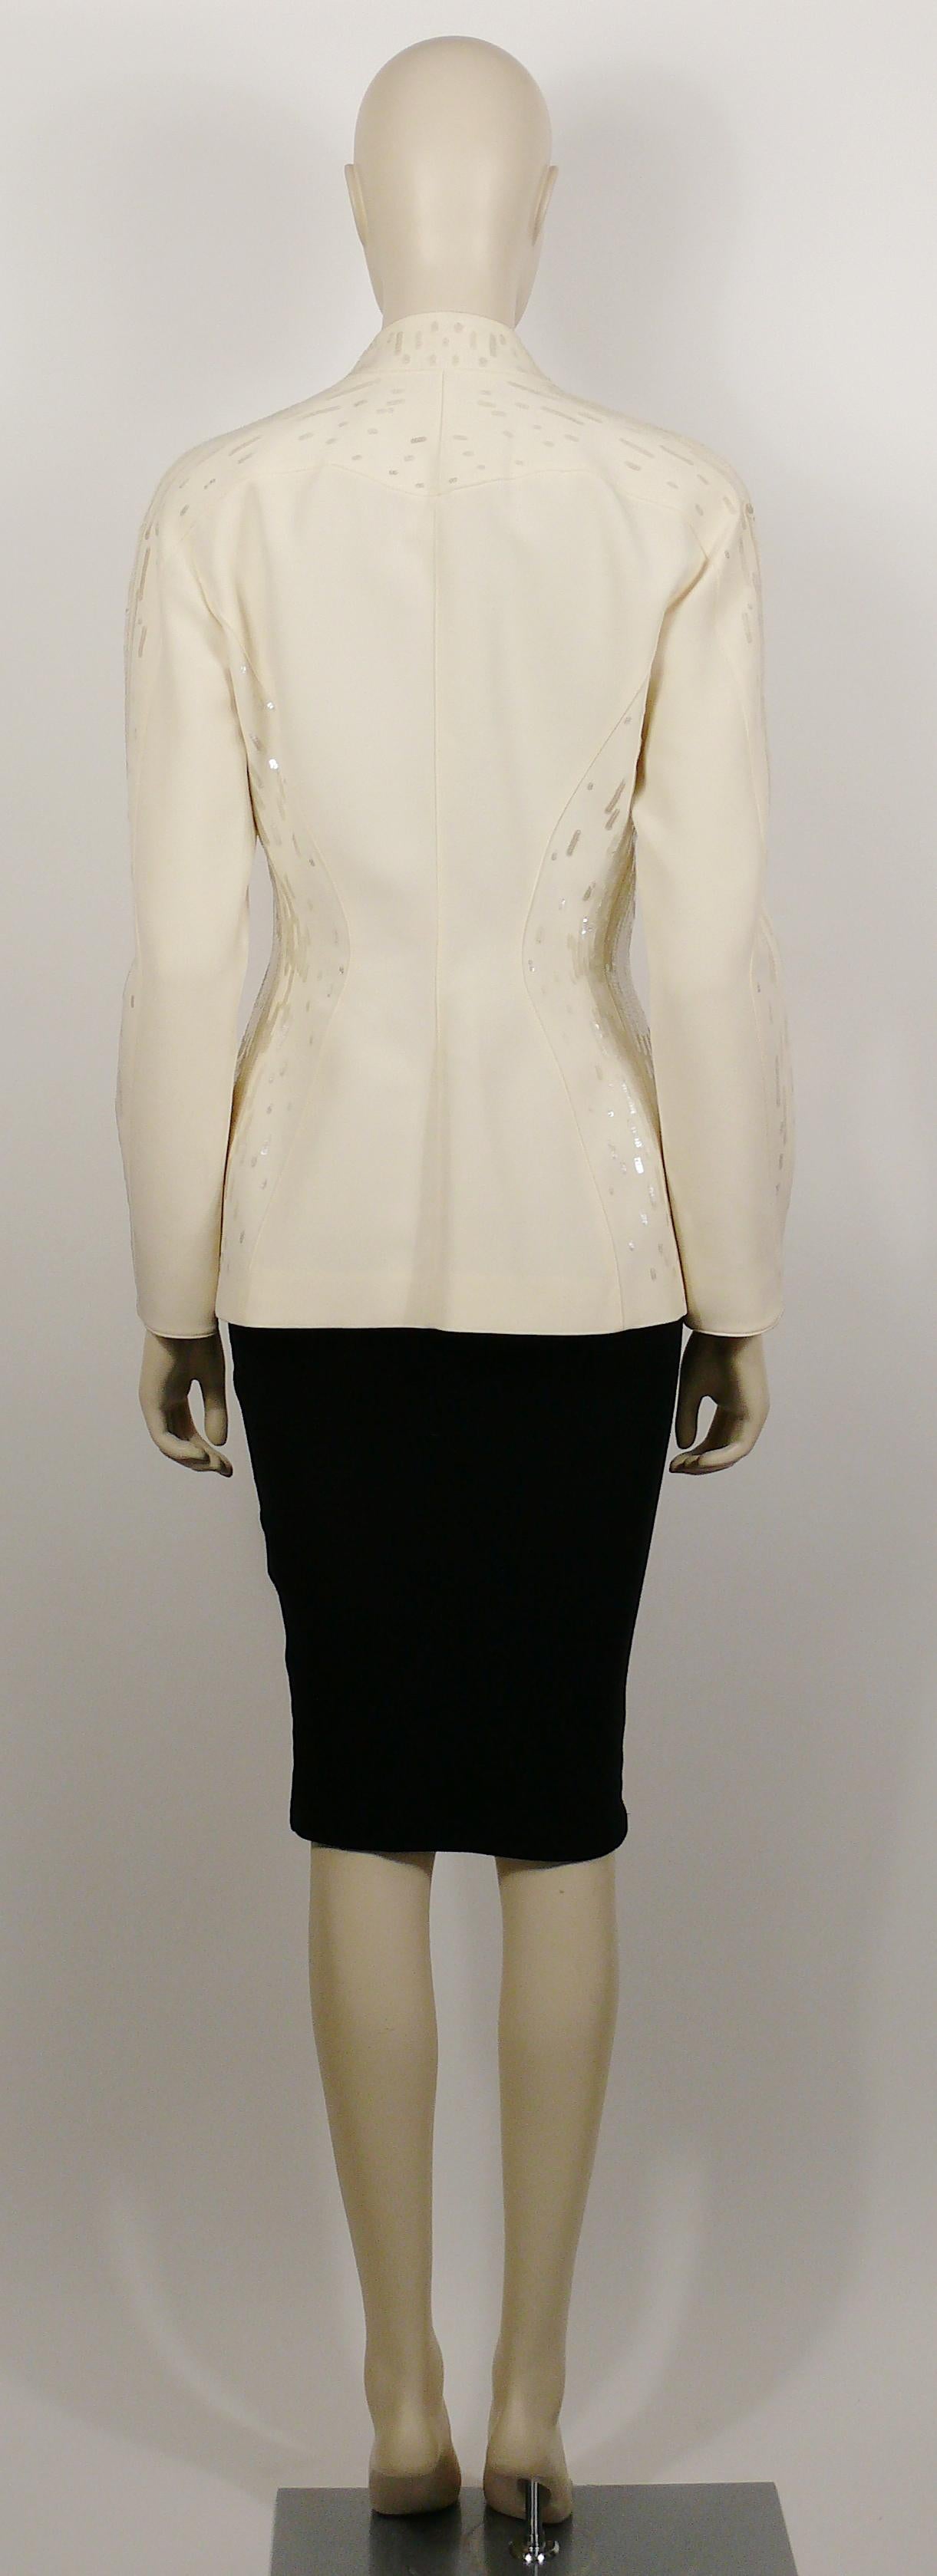 Thierry Mugler Couture Vintage Off White Sequined Jacket For Sale 3